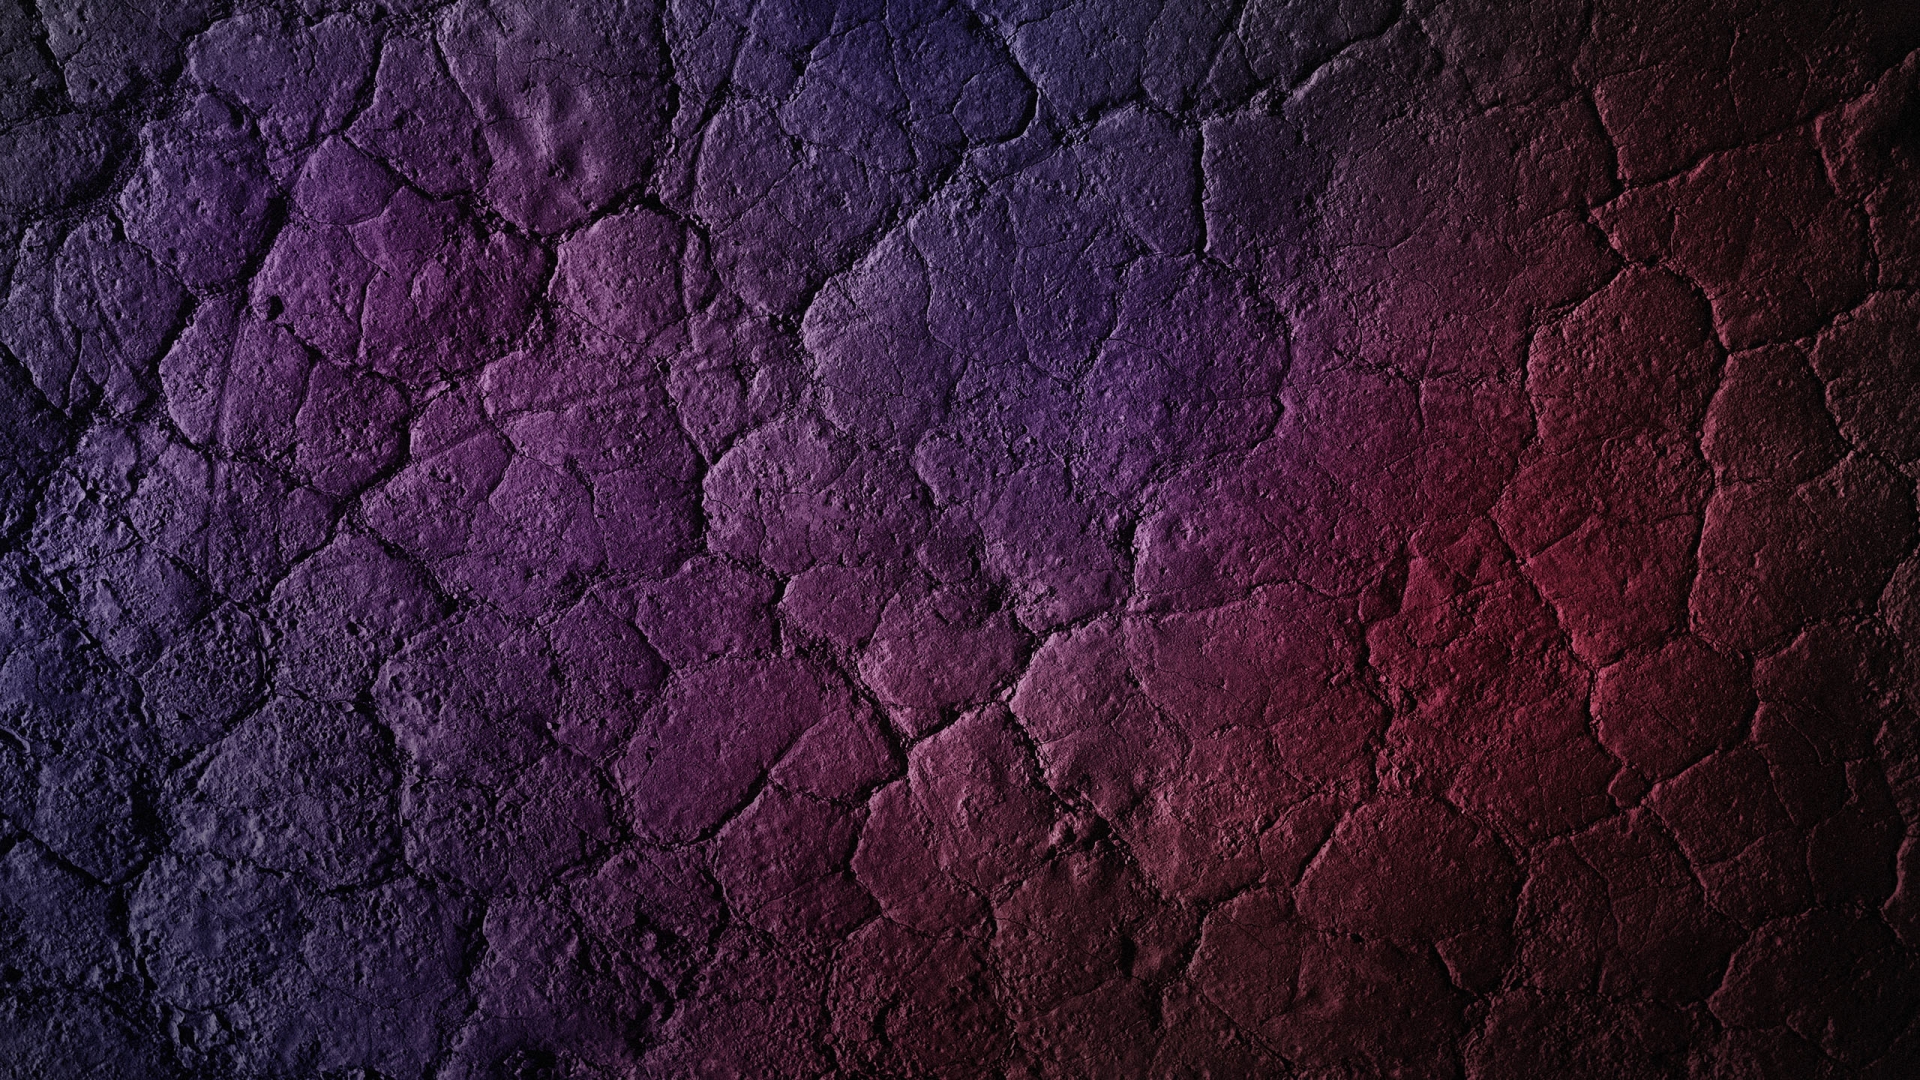 Eroded Wall for 1920 x 1080 HDTV 1080p resolution